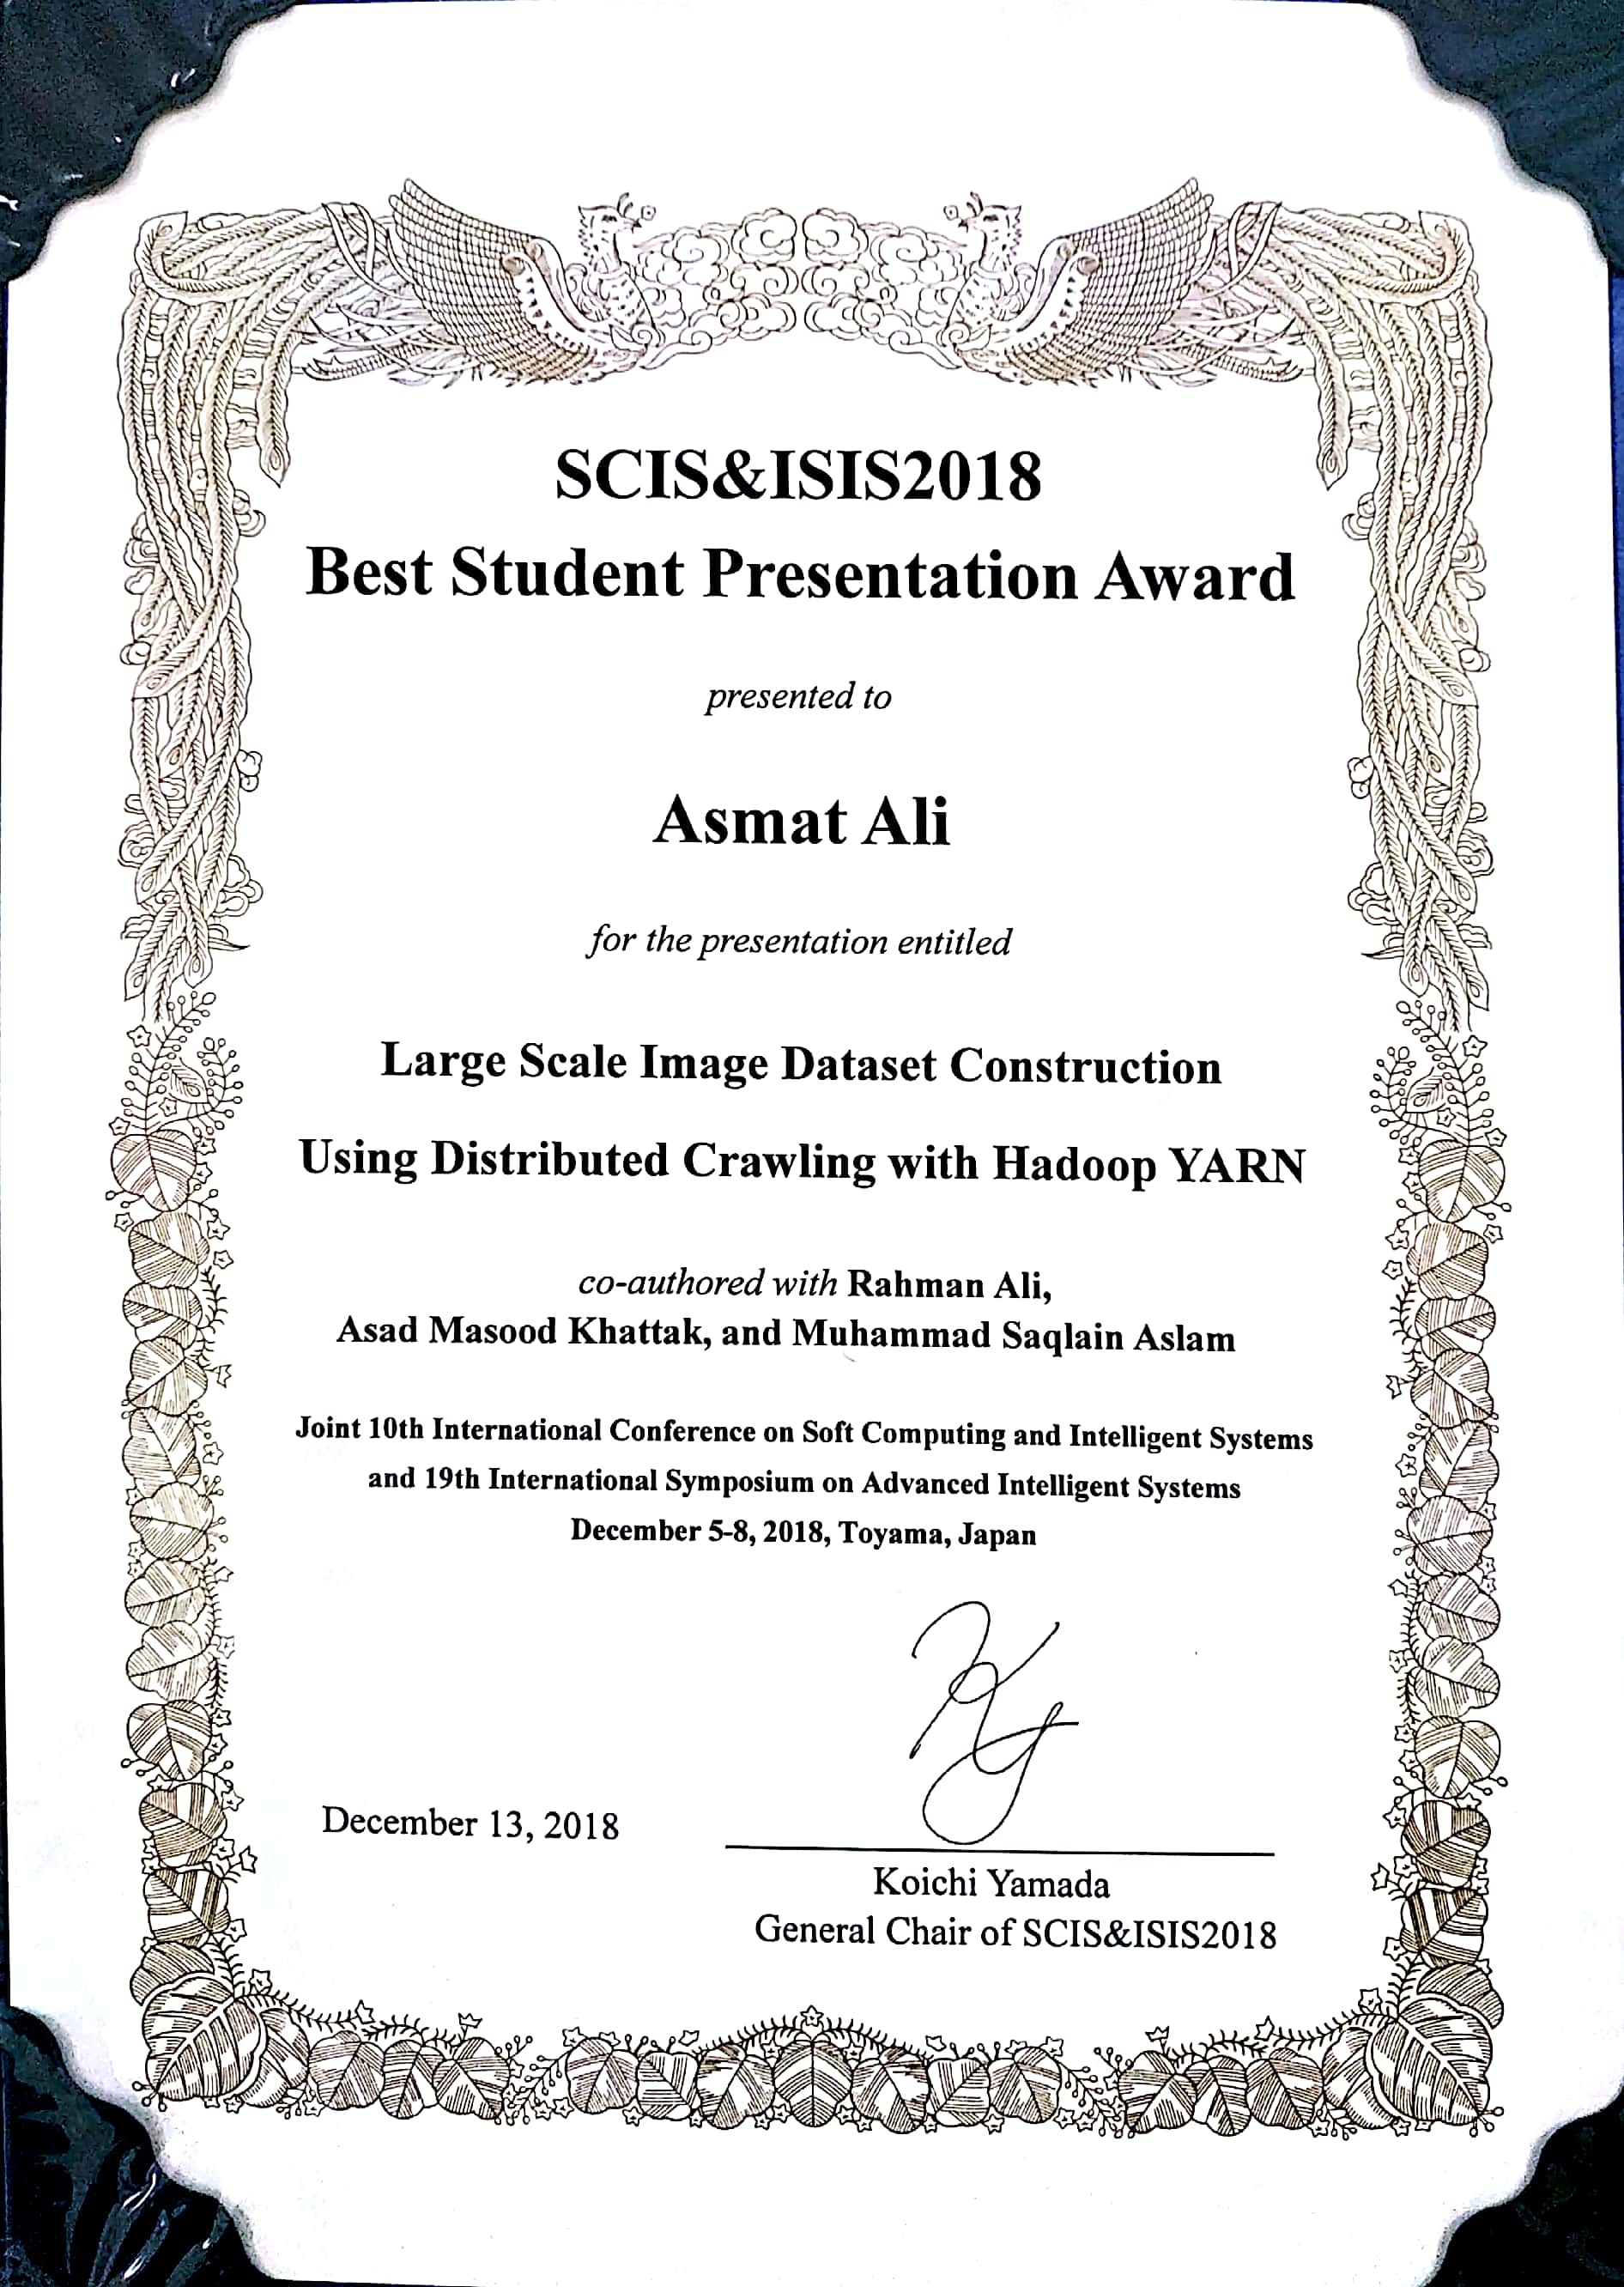 SCIS & ISIS 2018 Conference best student presentation awarded to Asmat Ali, student of Dr. Rehaman Ali